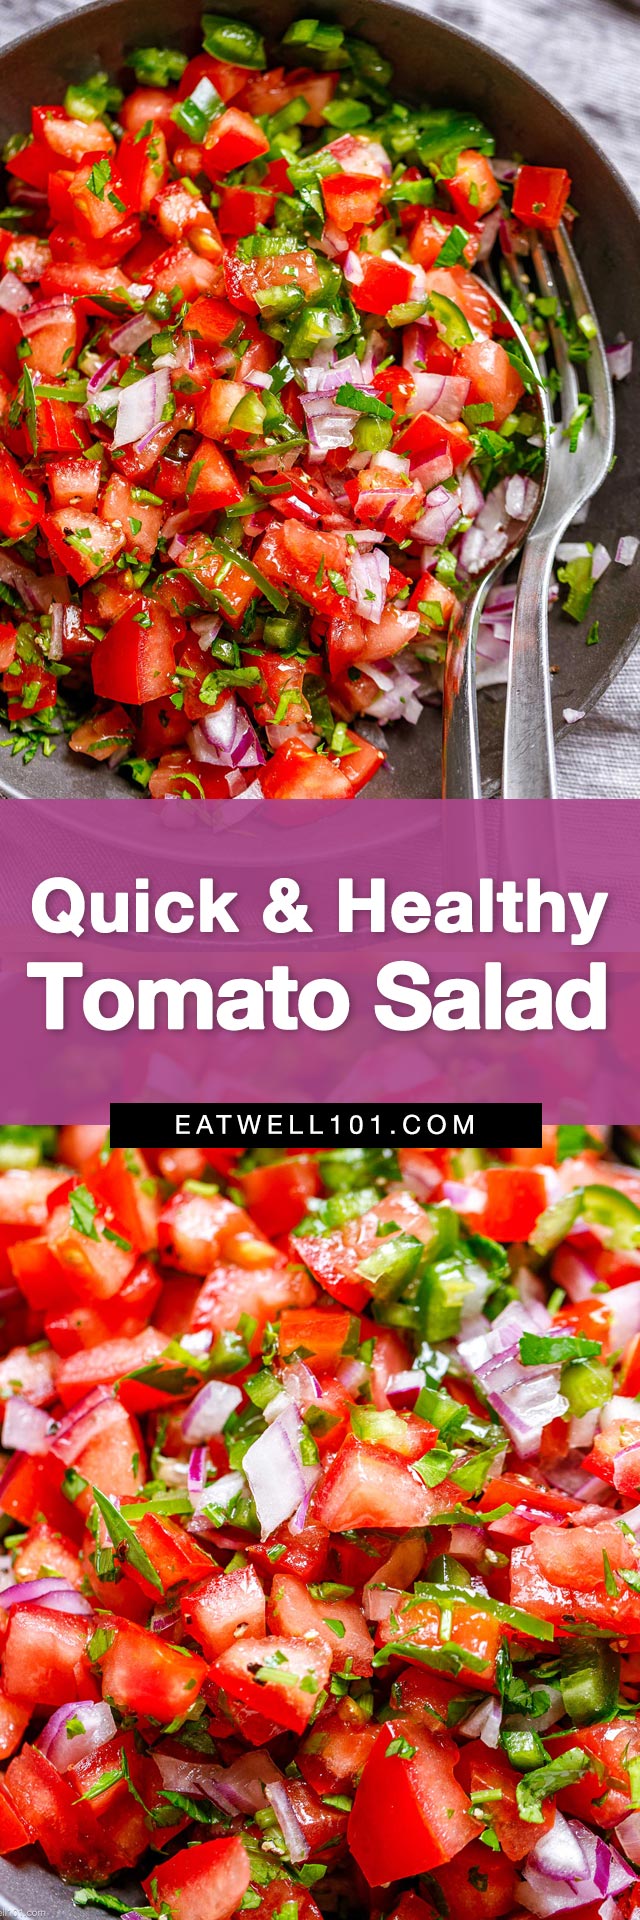 Healthy Tomato Salad Recipe - 
 #tomato #salad #jalapeno #recipe #eatwell101 - This tomato salad is perfect for a casual dinner or a Summer potluck. Simply the best of all tomato salads around!